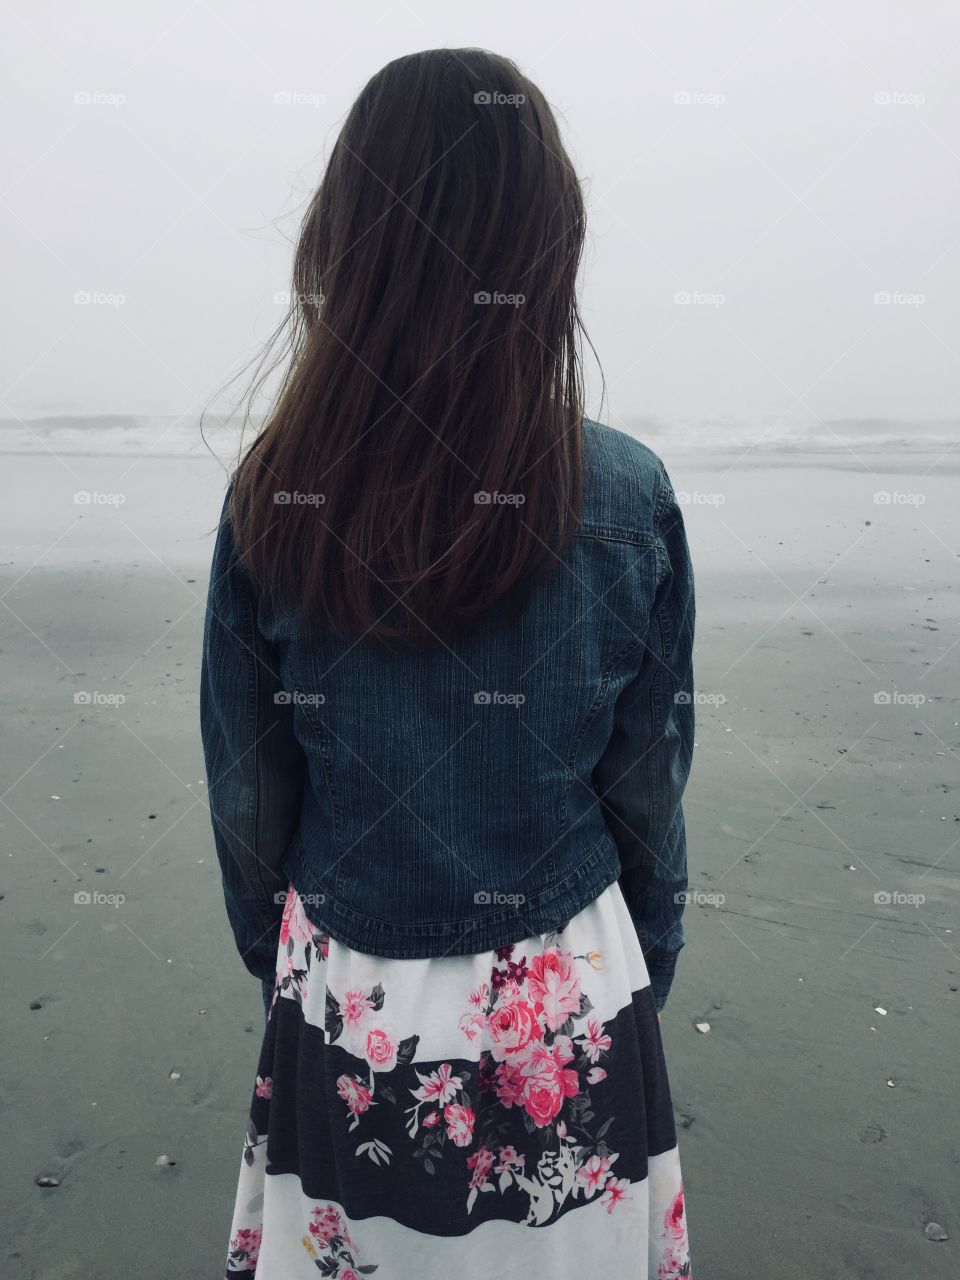 Girl looking out into the ocean 